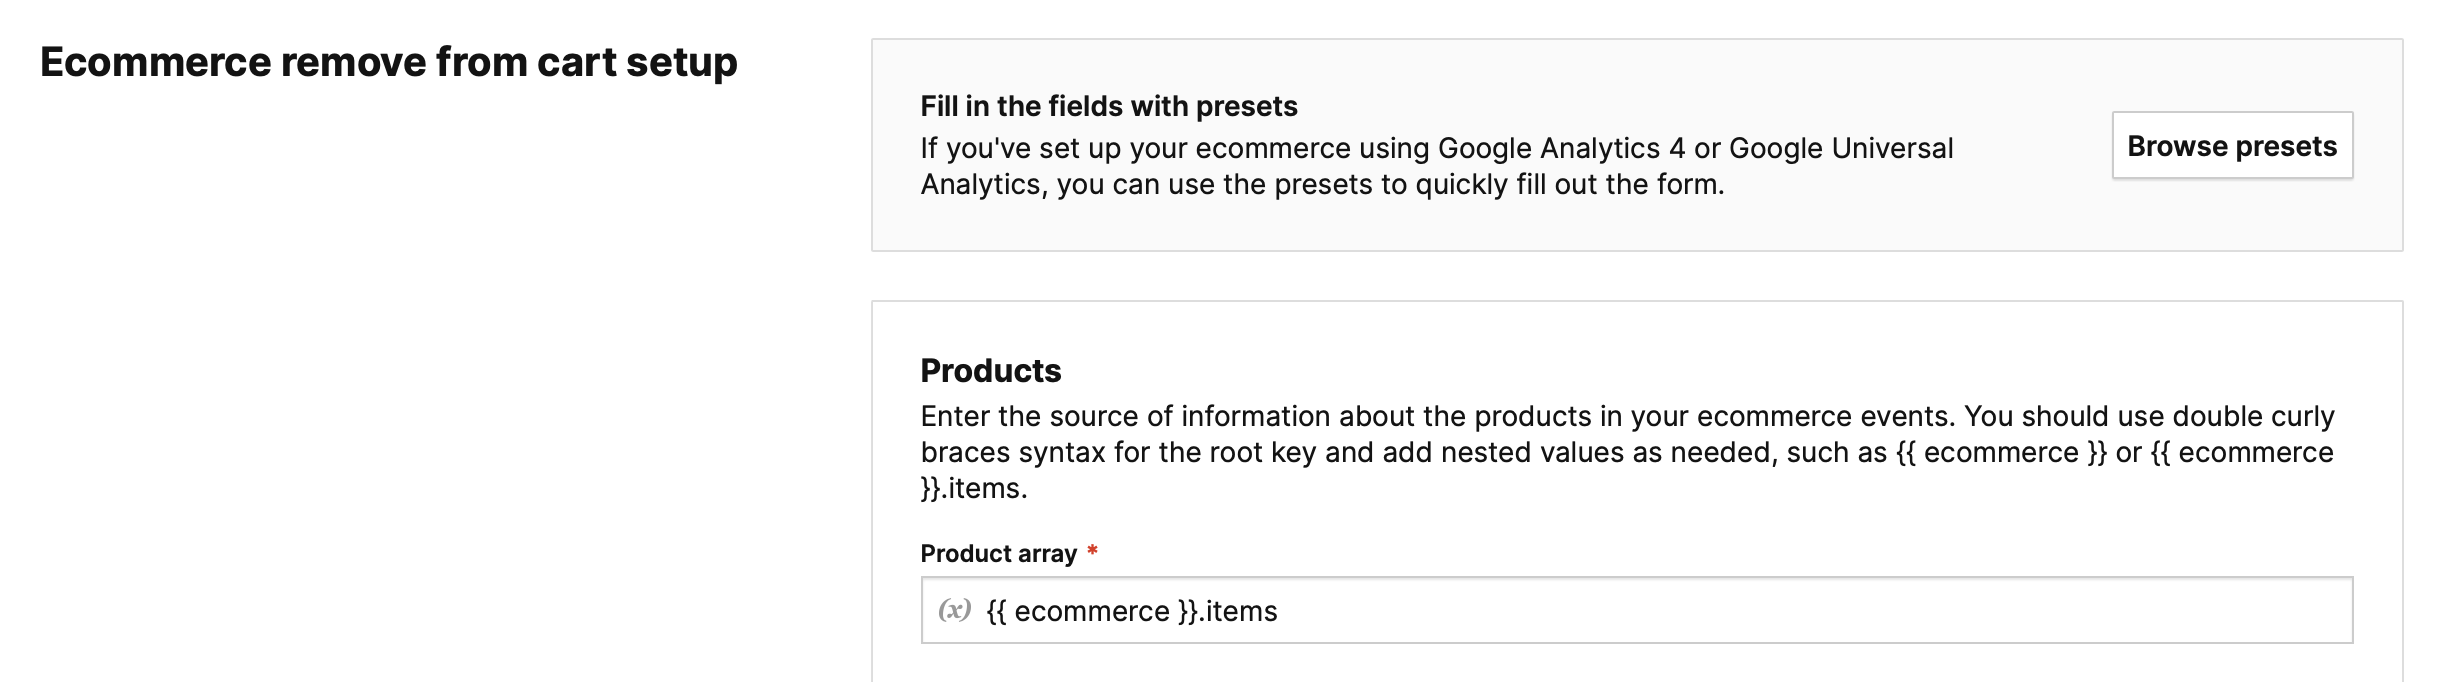 Ecommerce remove-from-cart tag in Piwik PRO